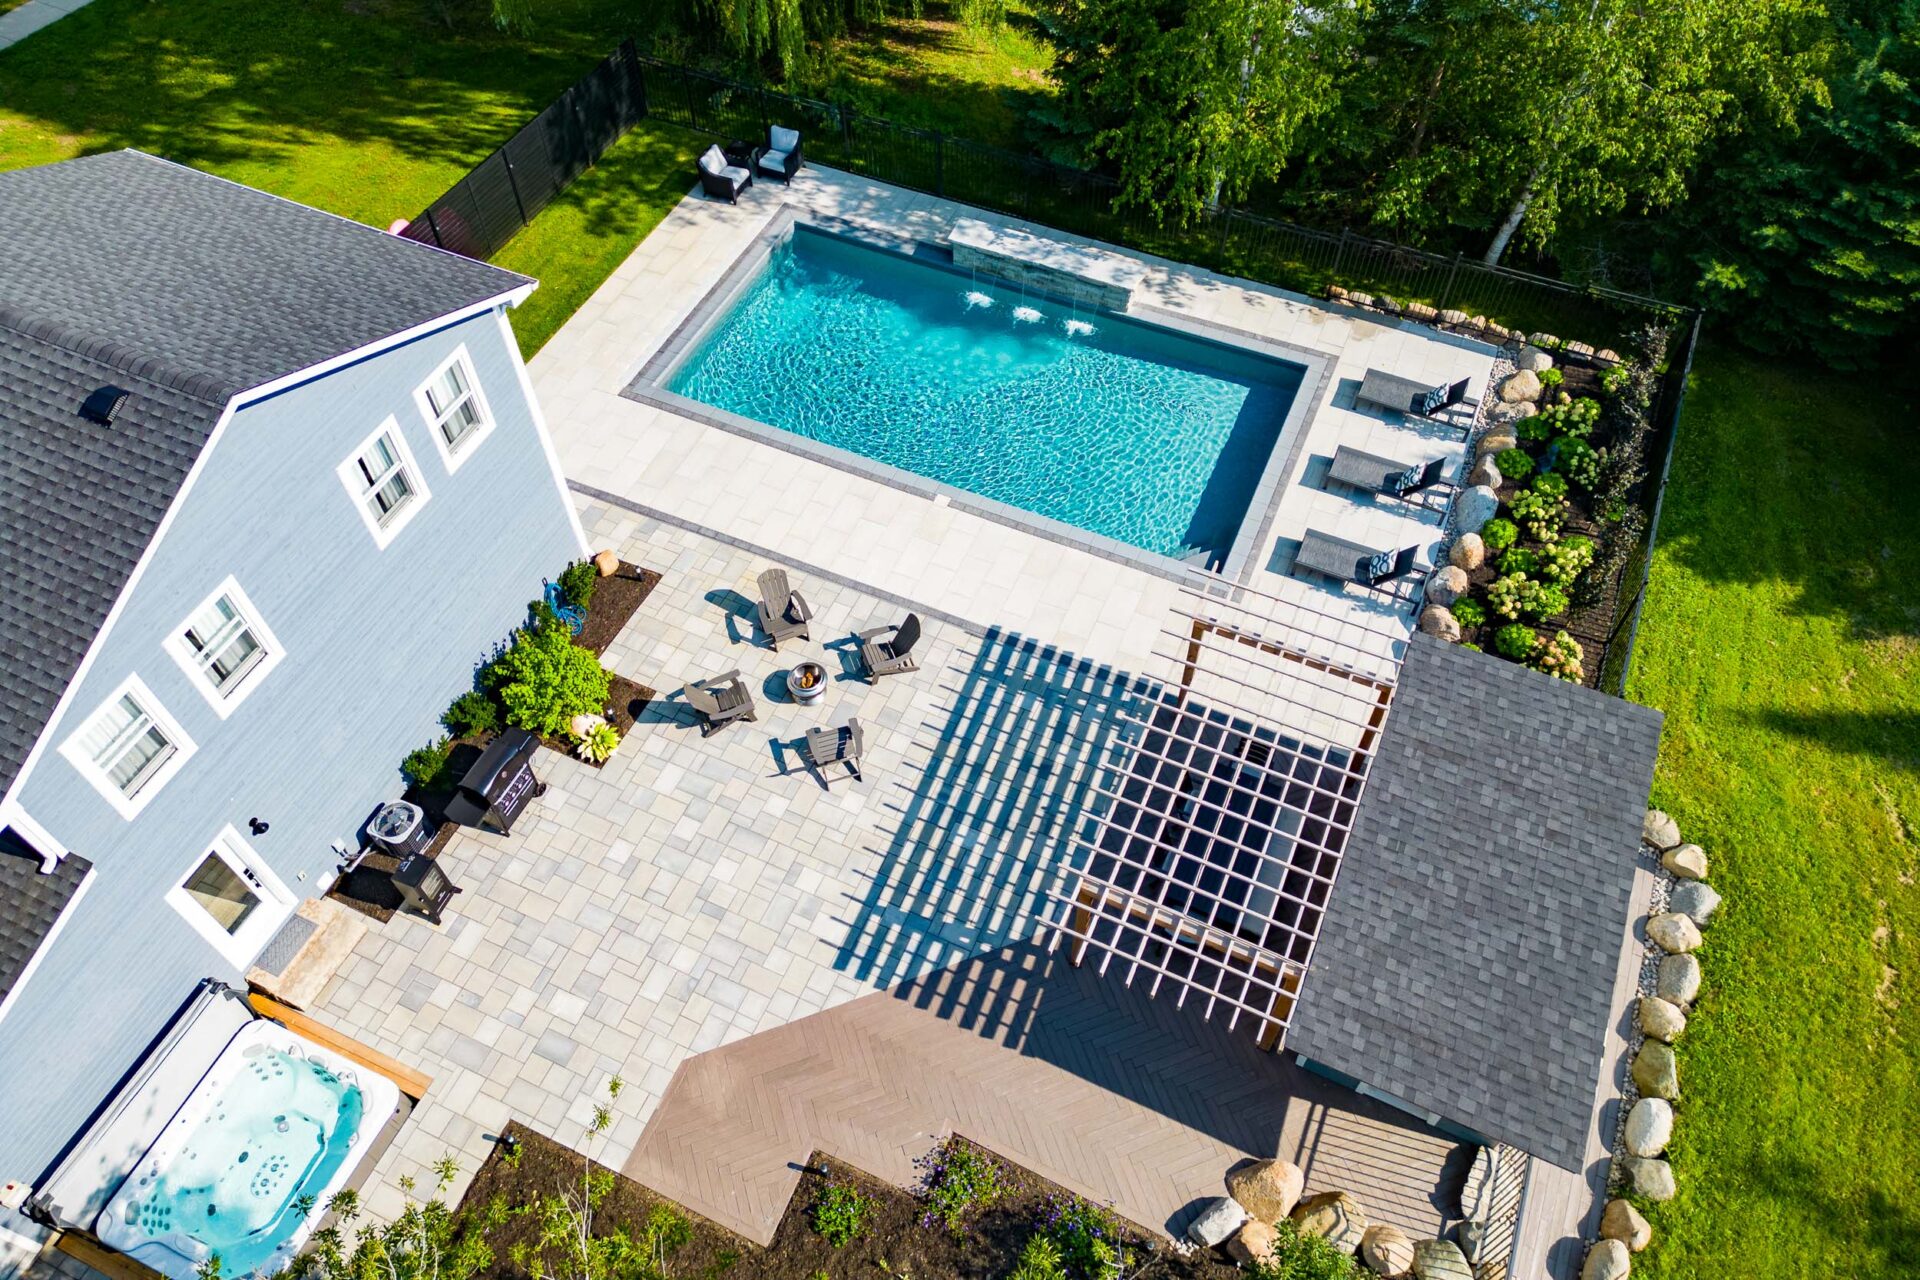 Aerial view of a backyard with a rectangular swimming pool, patio area with seating, hot tub, and manicured lawn bordered by a fence and trees.